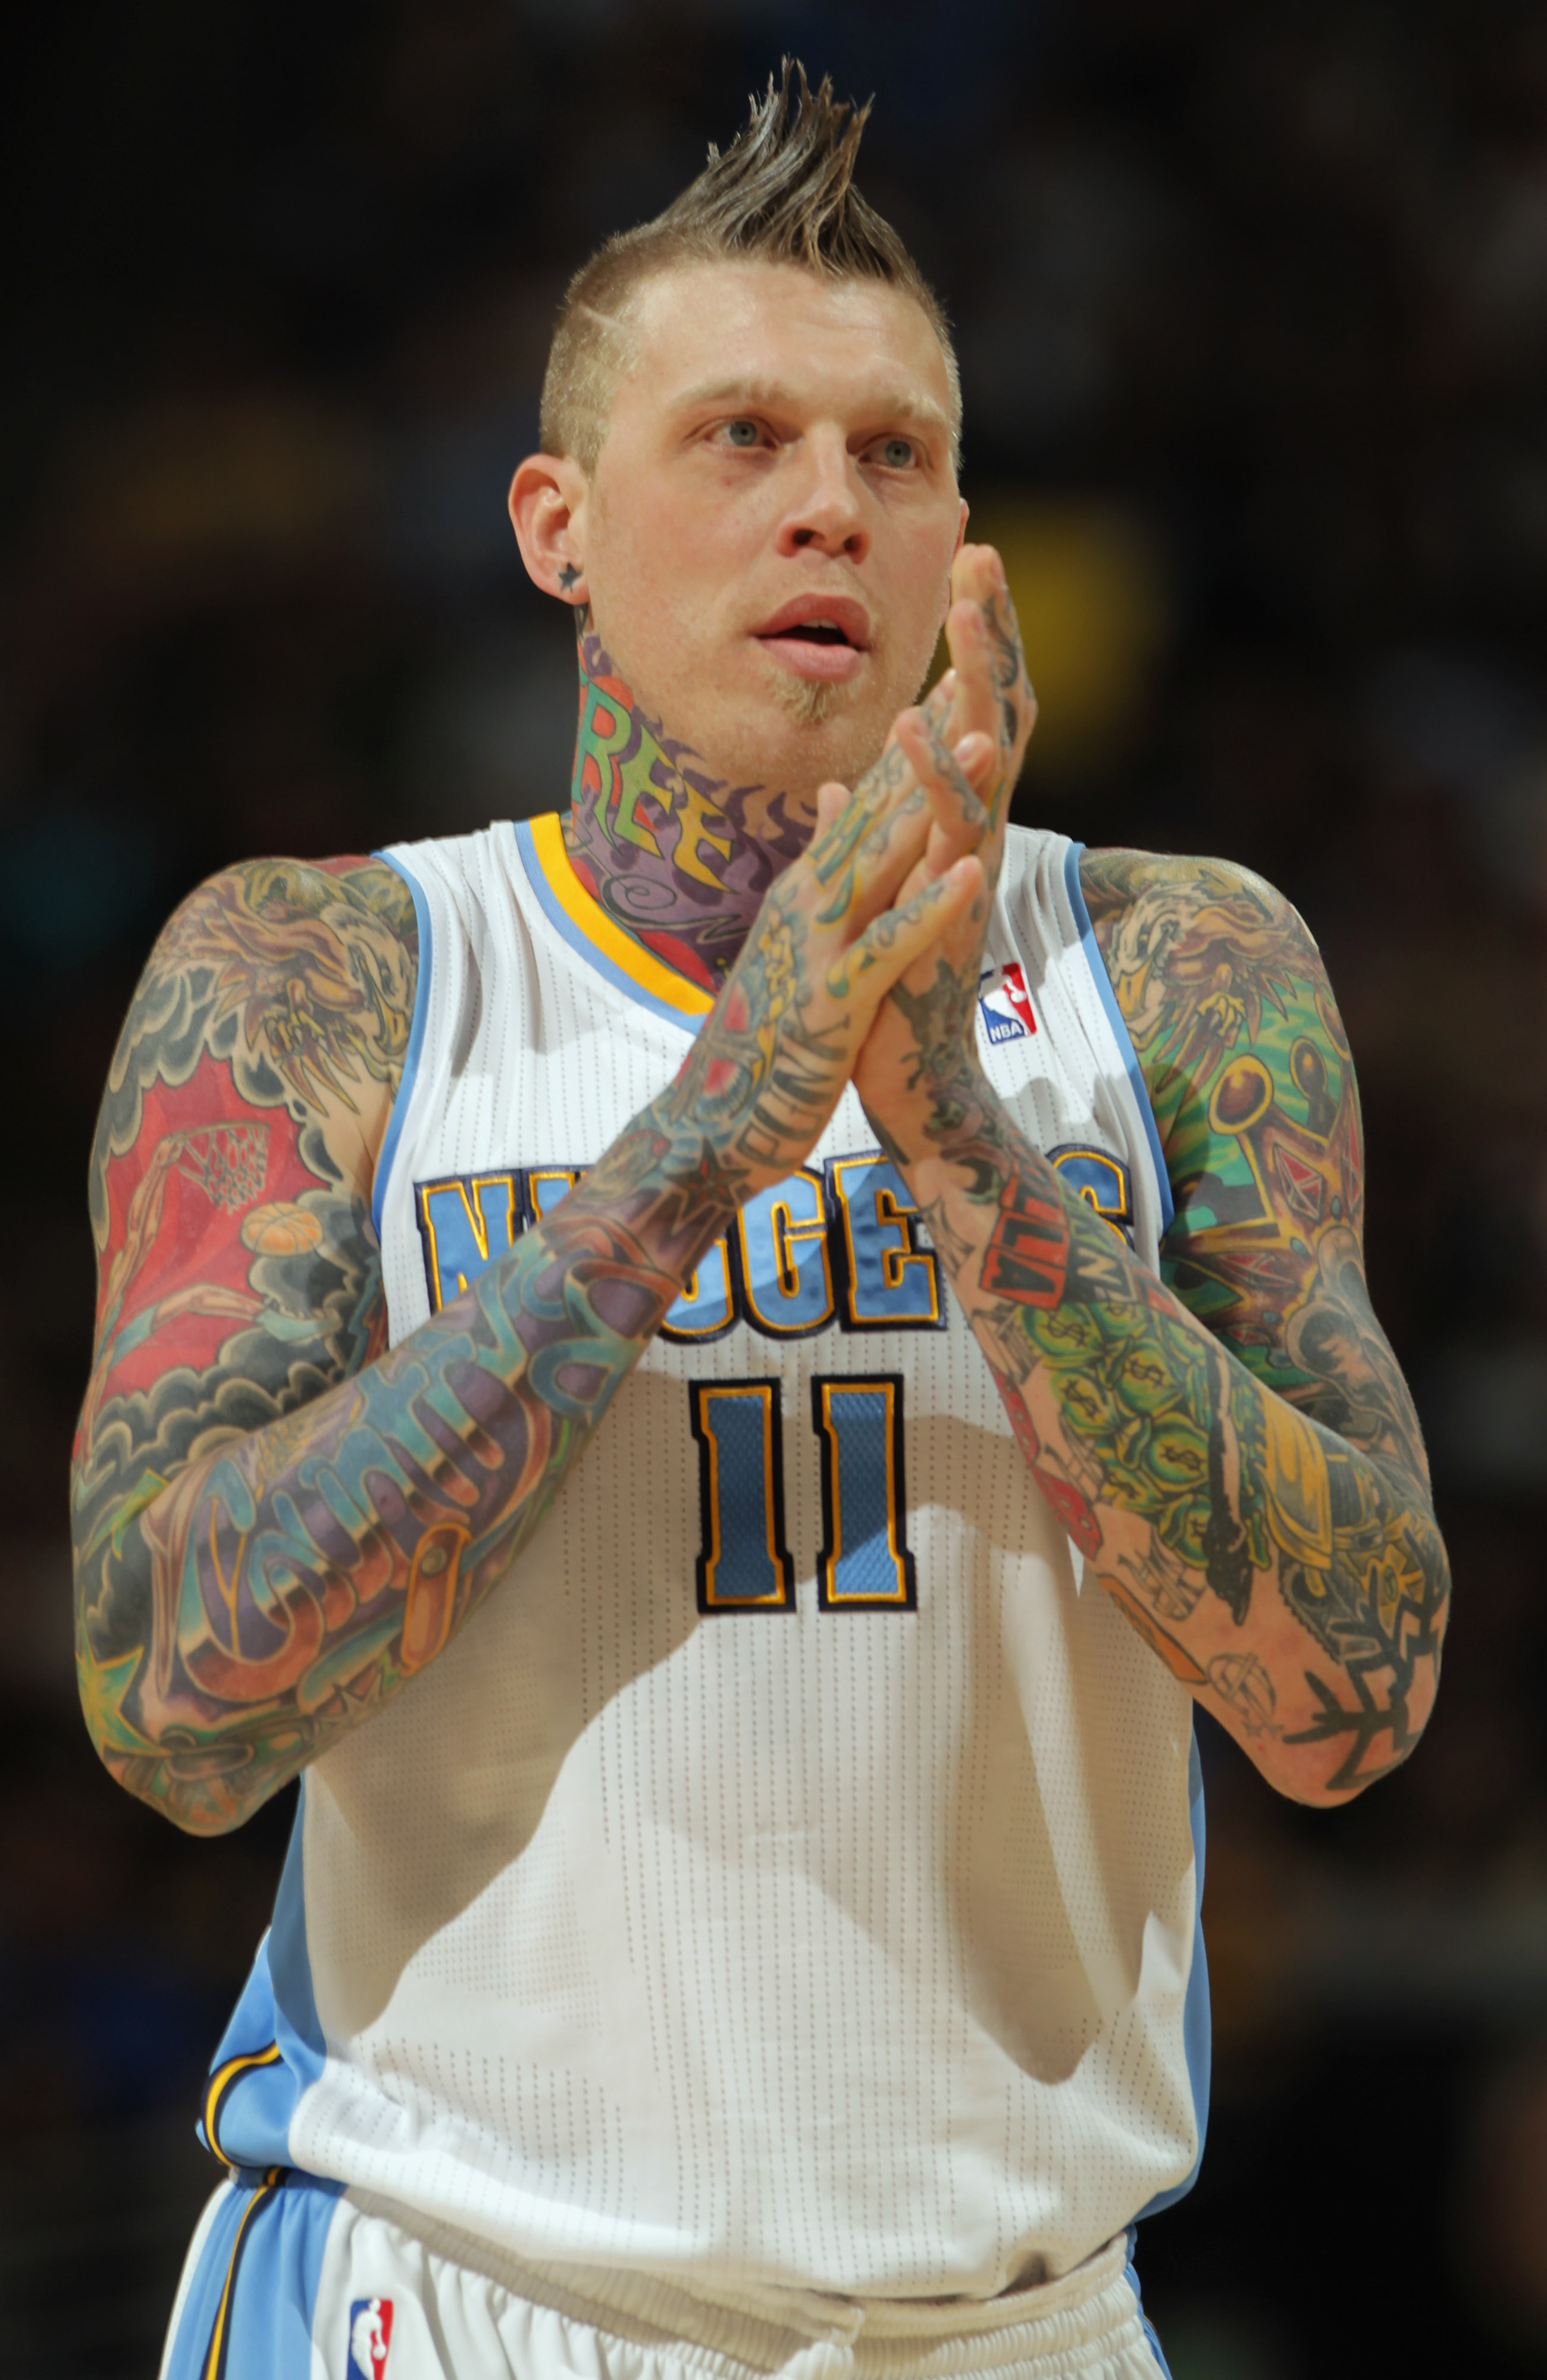 Top 20 NBA Players With Crazy Tattoos - www.thesportswear.it